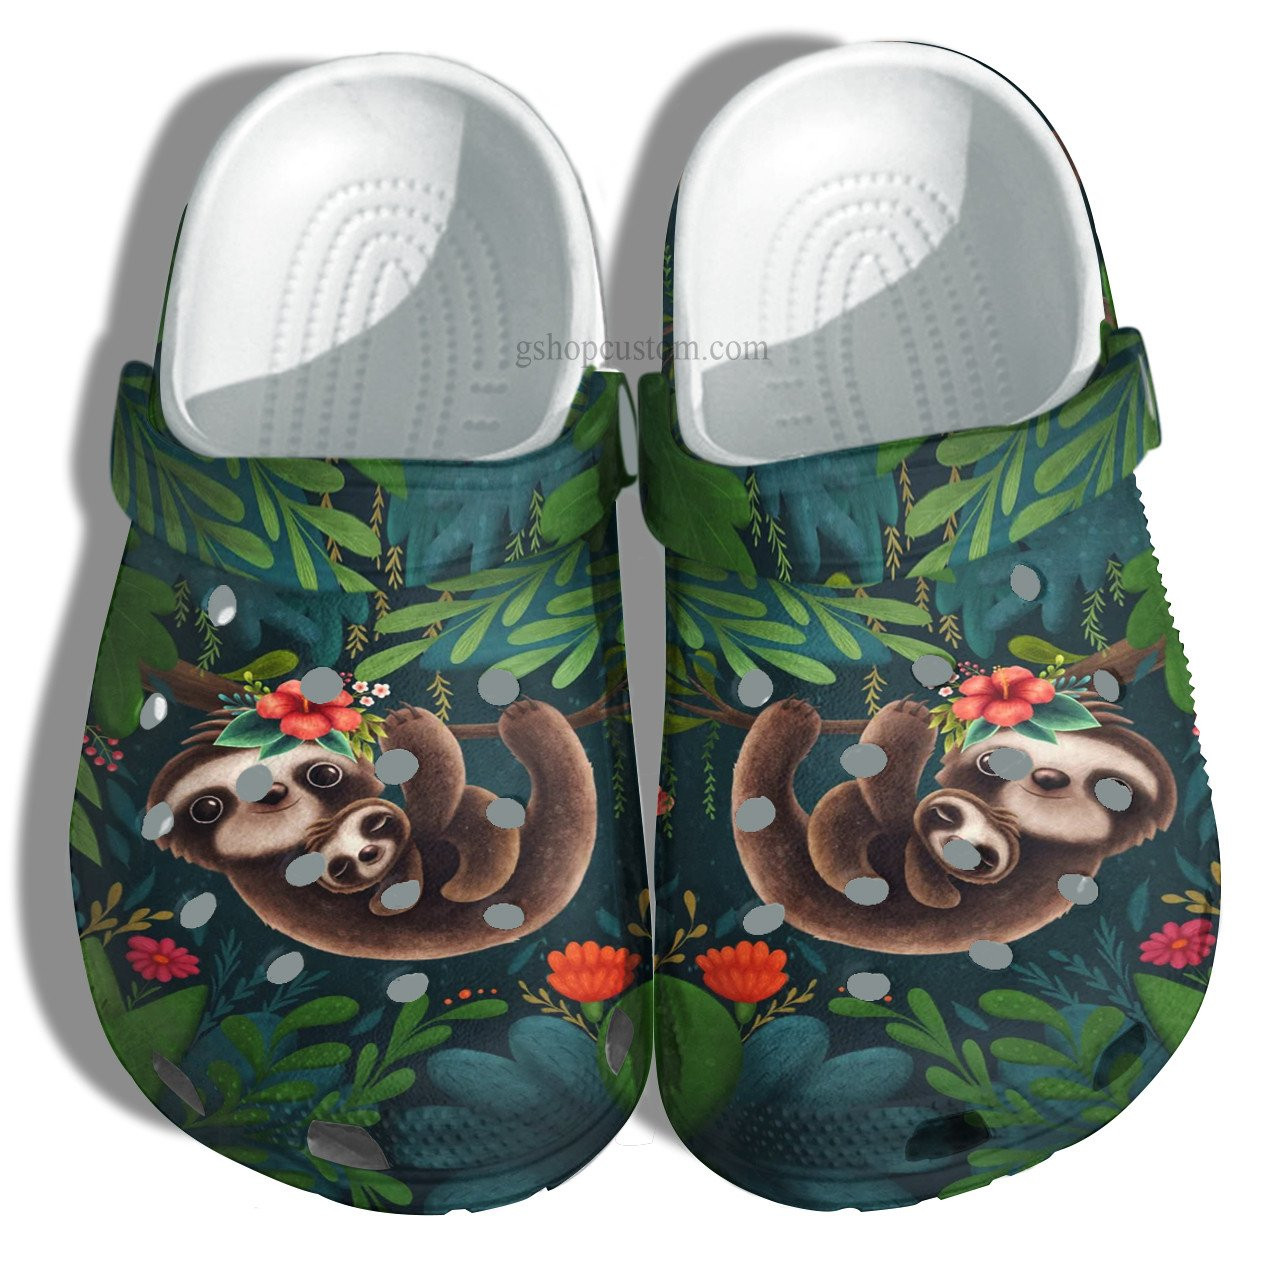 Chibi Sloth Mom Crocs Shoes - Baby Sloth Mom First Mother Day Shoes Croc Clogs Jungle Camping Gift